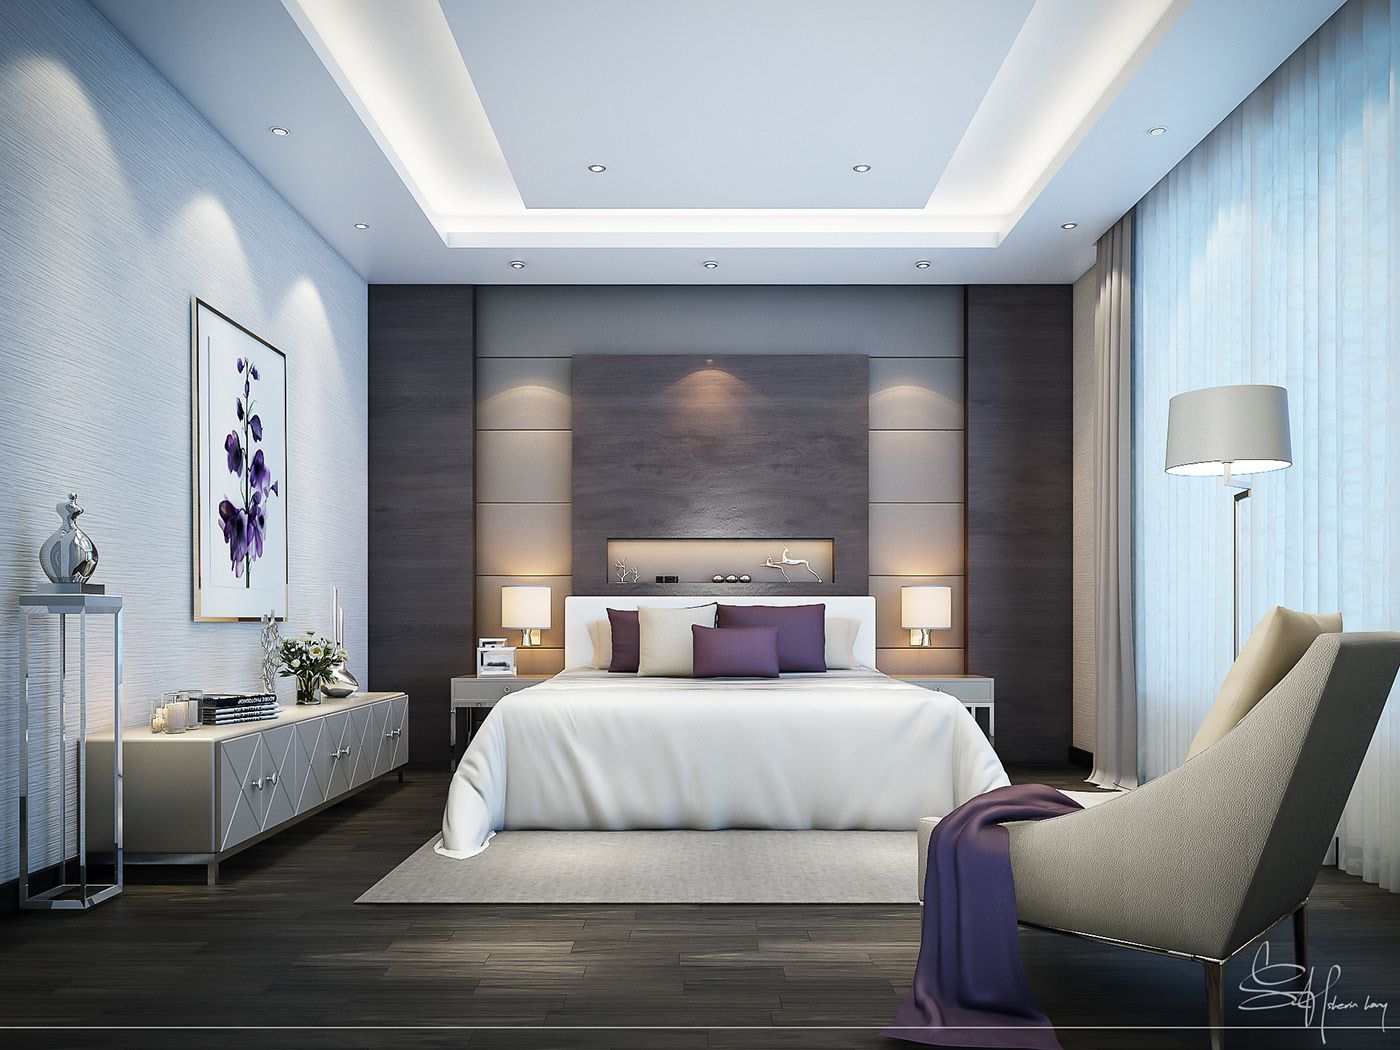 Above All: Transform Your Bedroom With Unique Ceiling Design Concepts